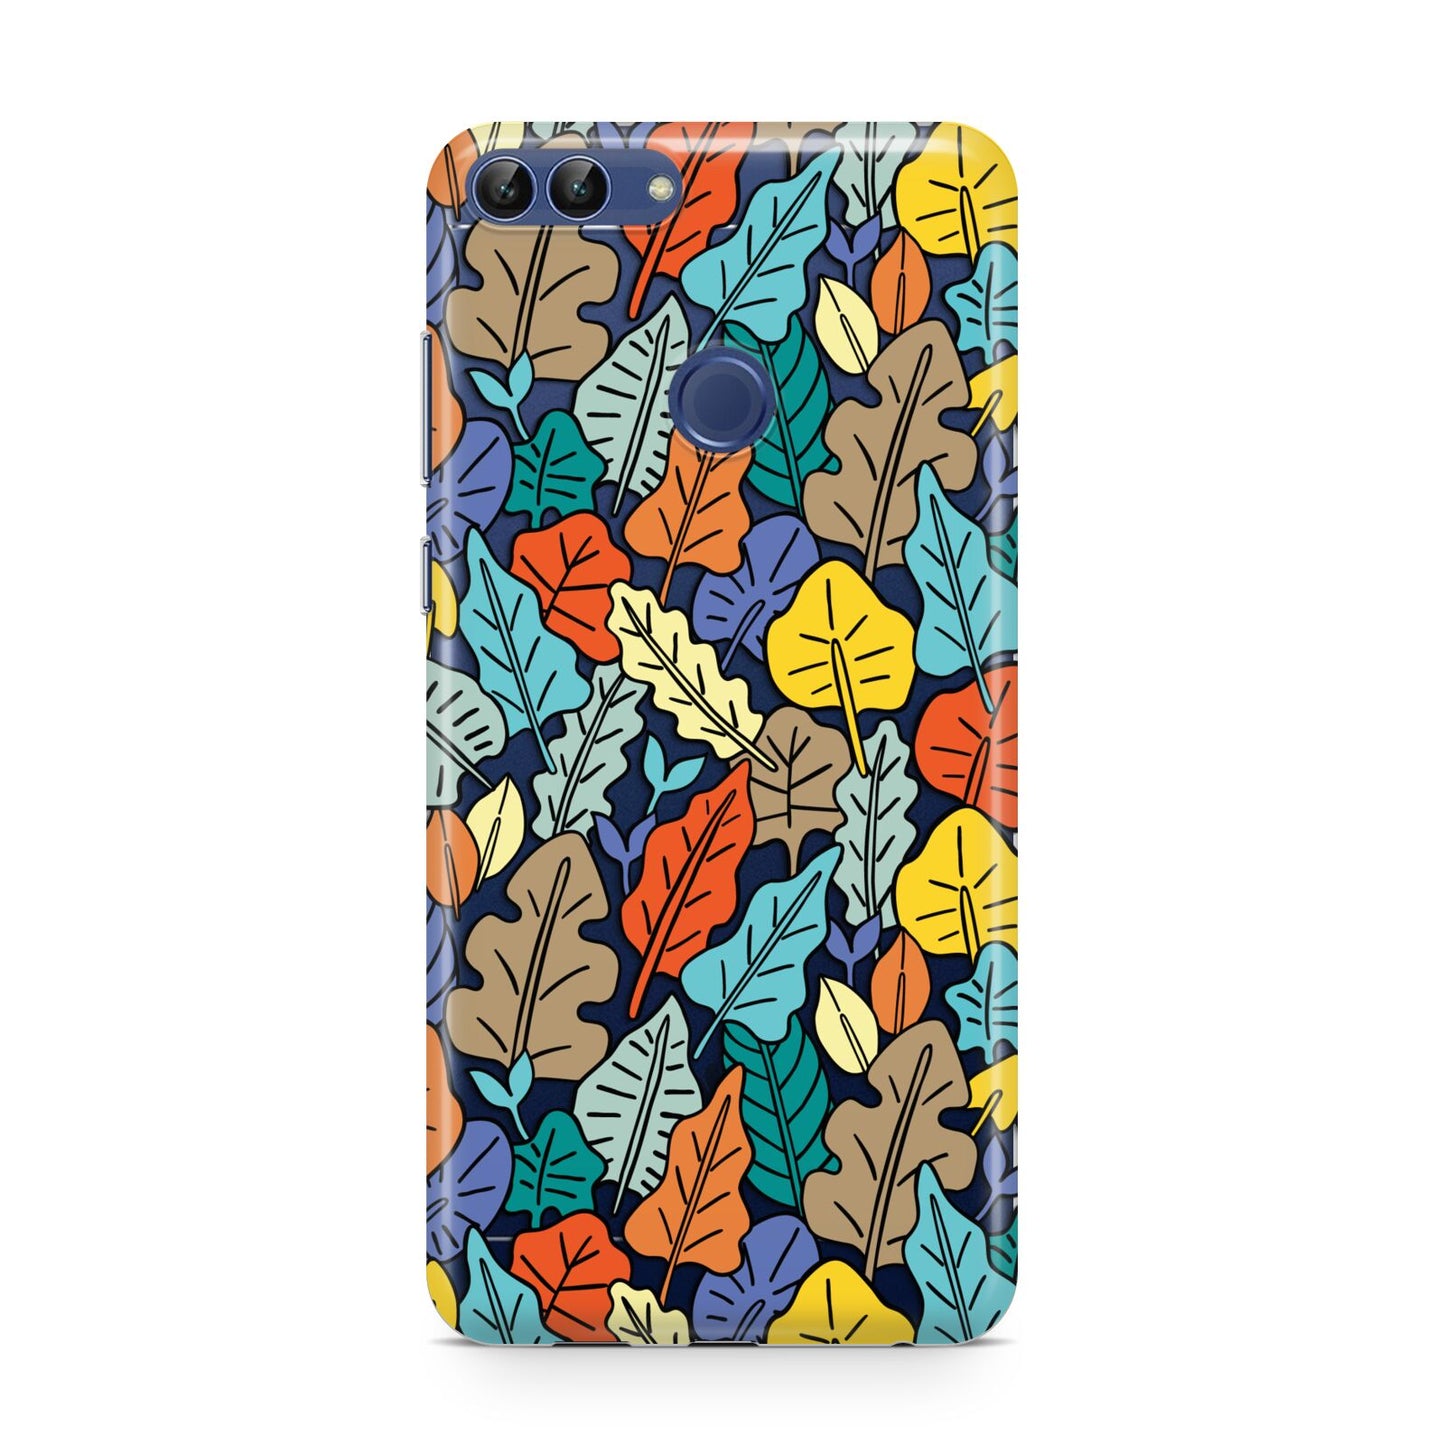 Autumn Leaves Huawei P Smart Case